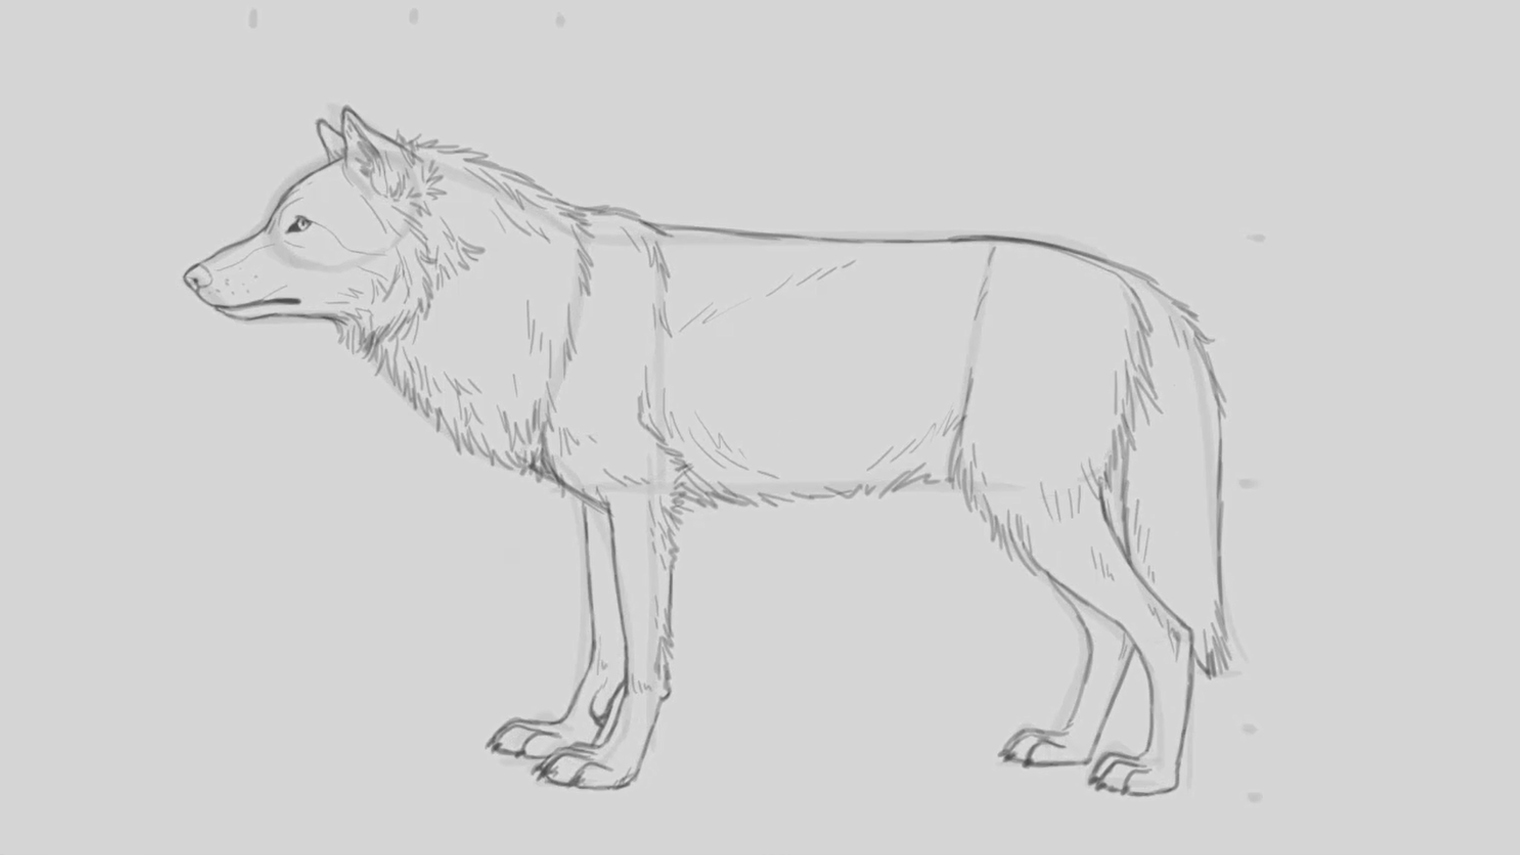 Pencil sketch of a wolf